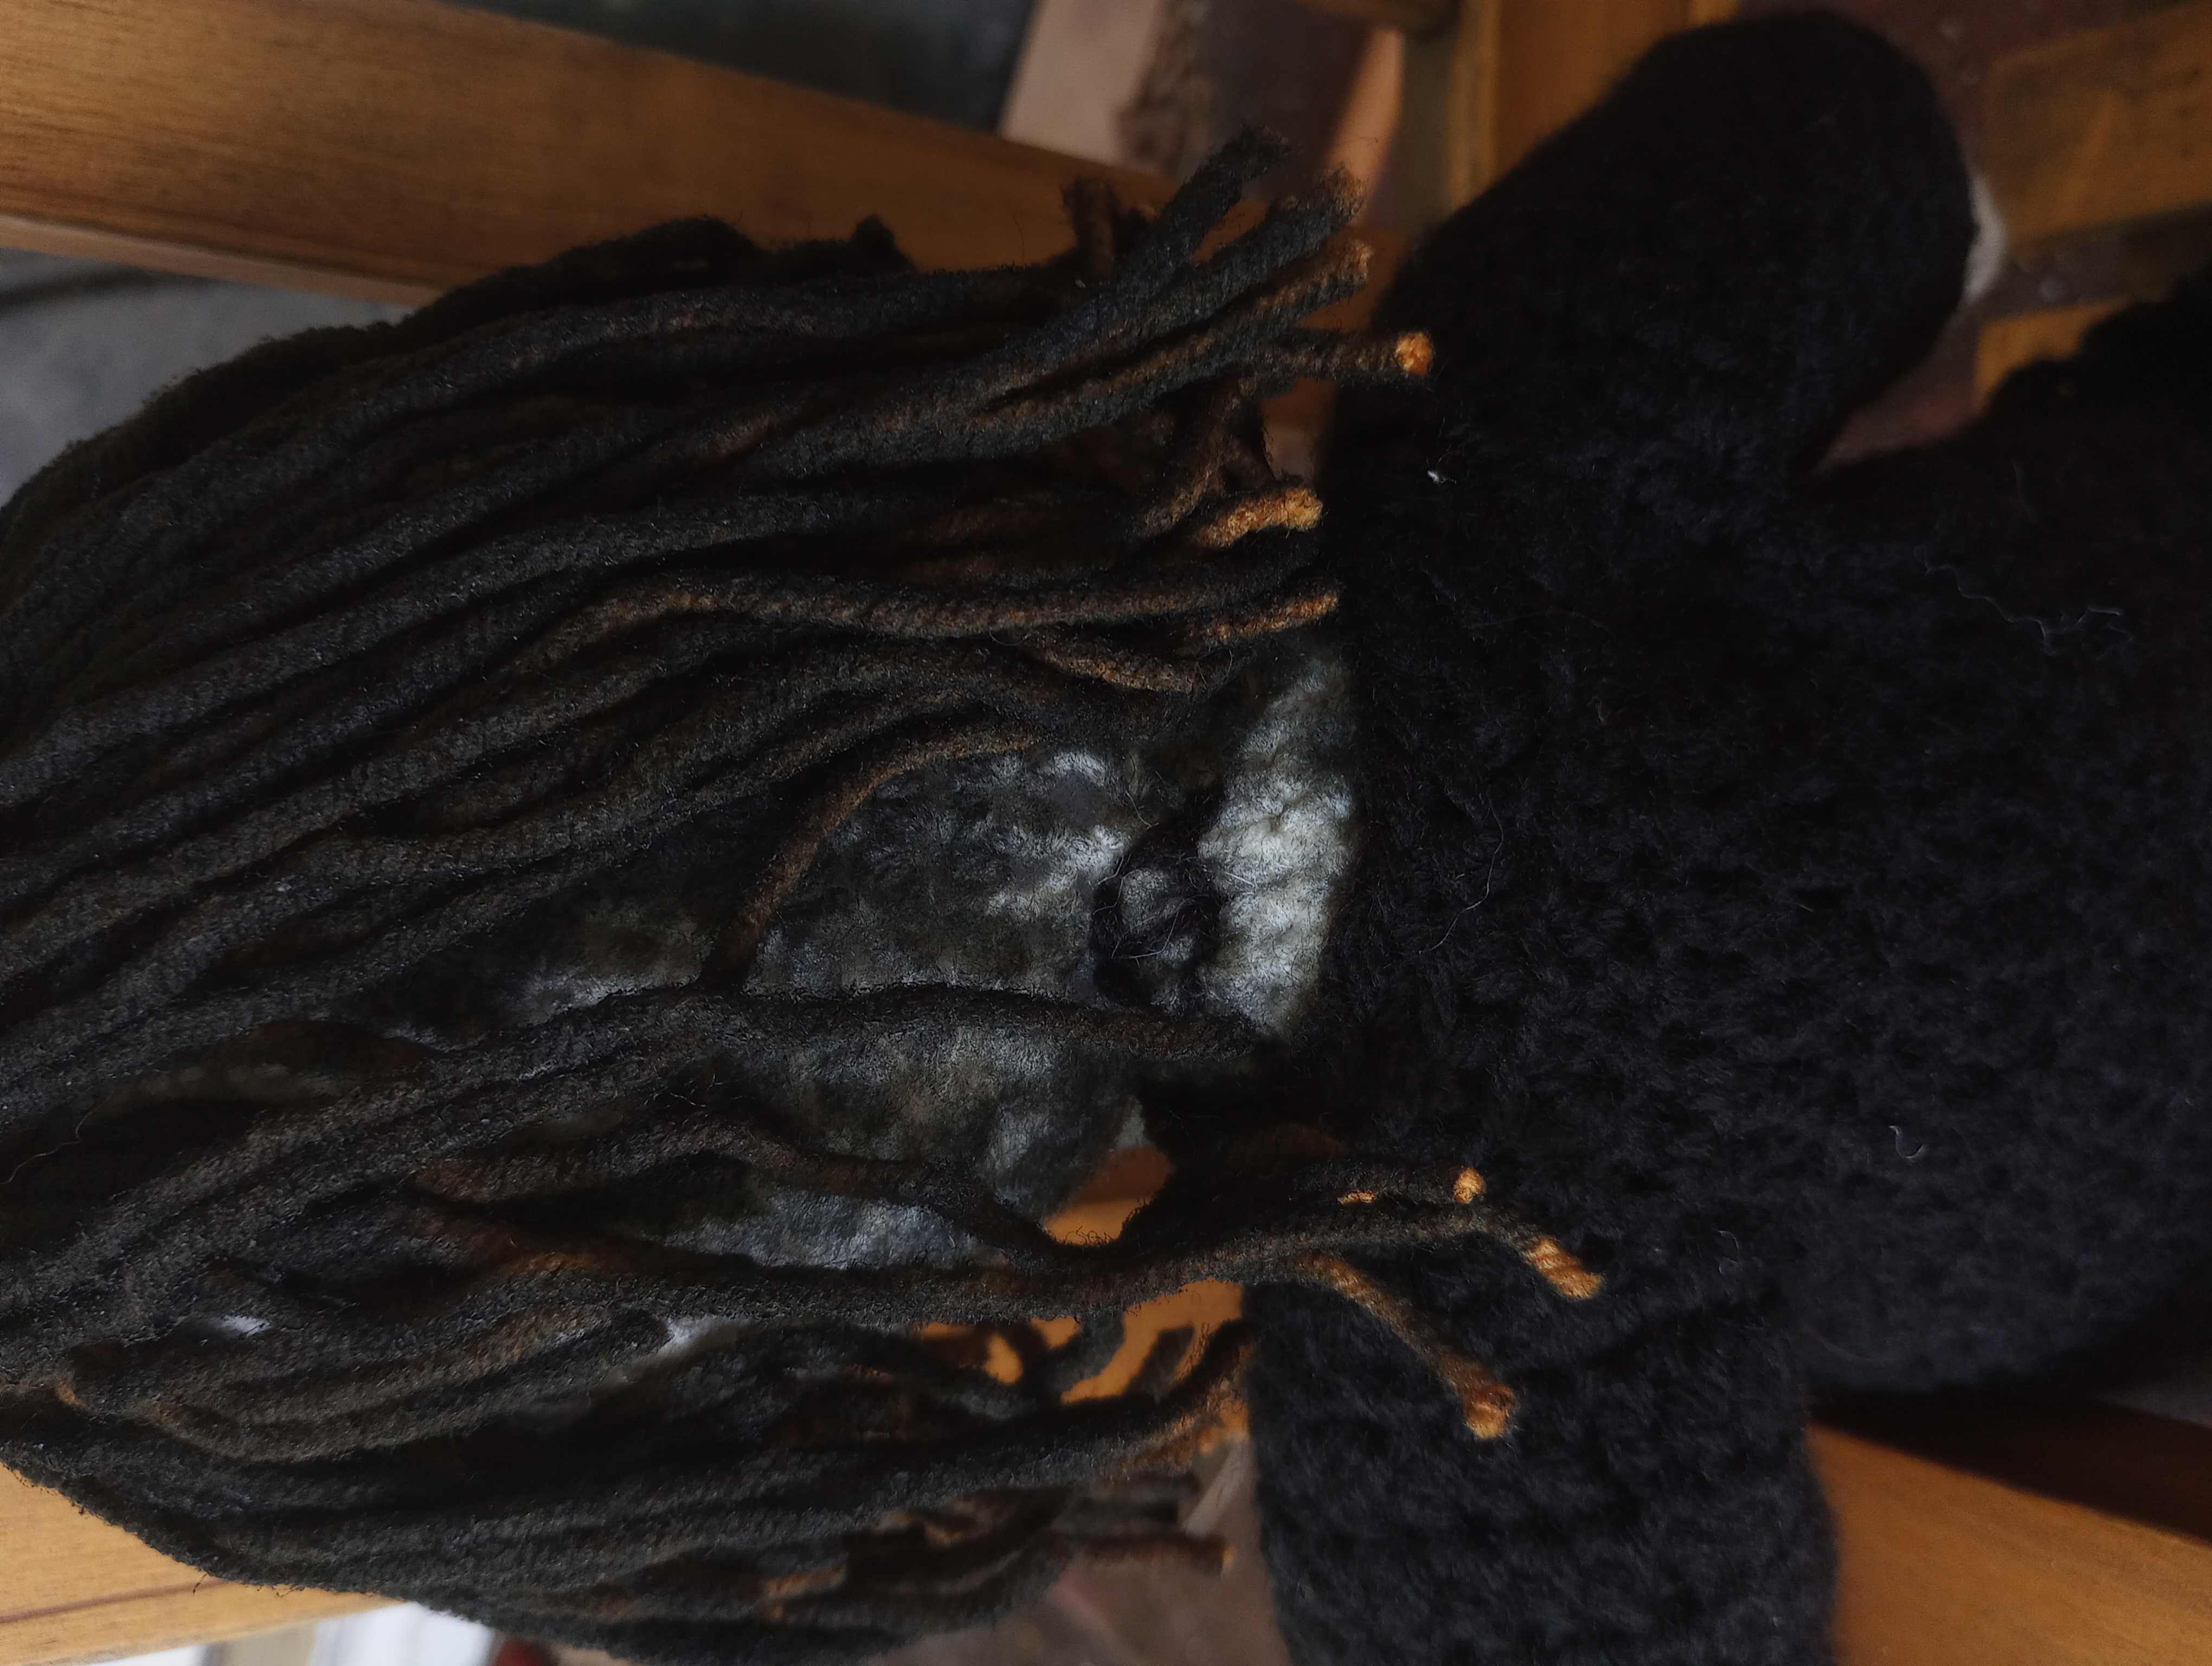 The back of the doll's head, showing the details of the poorly dyed hair